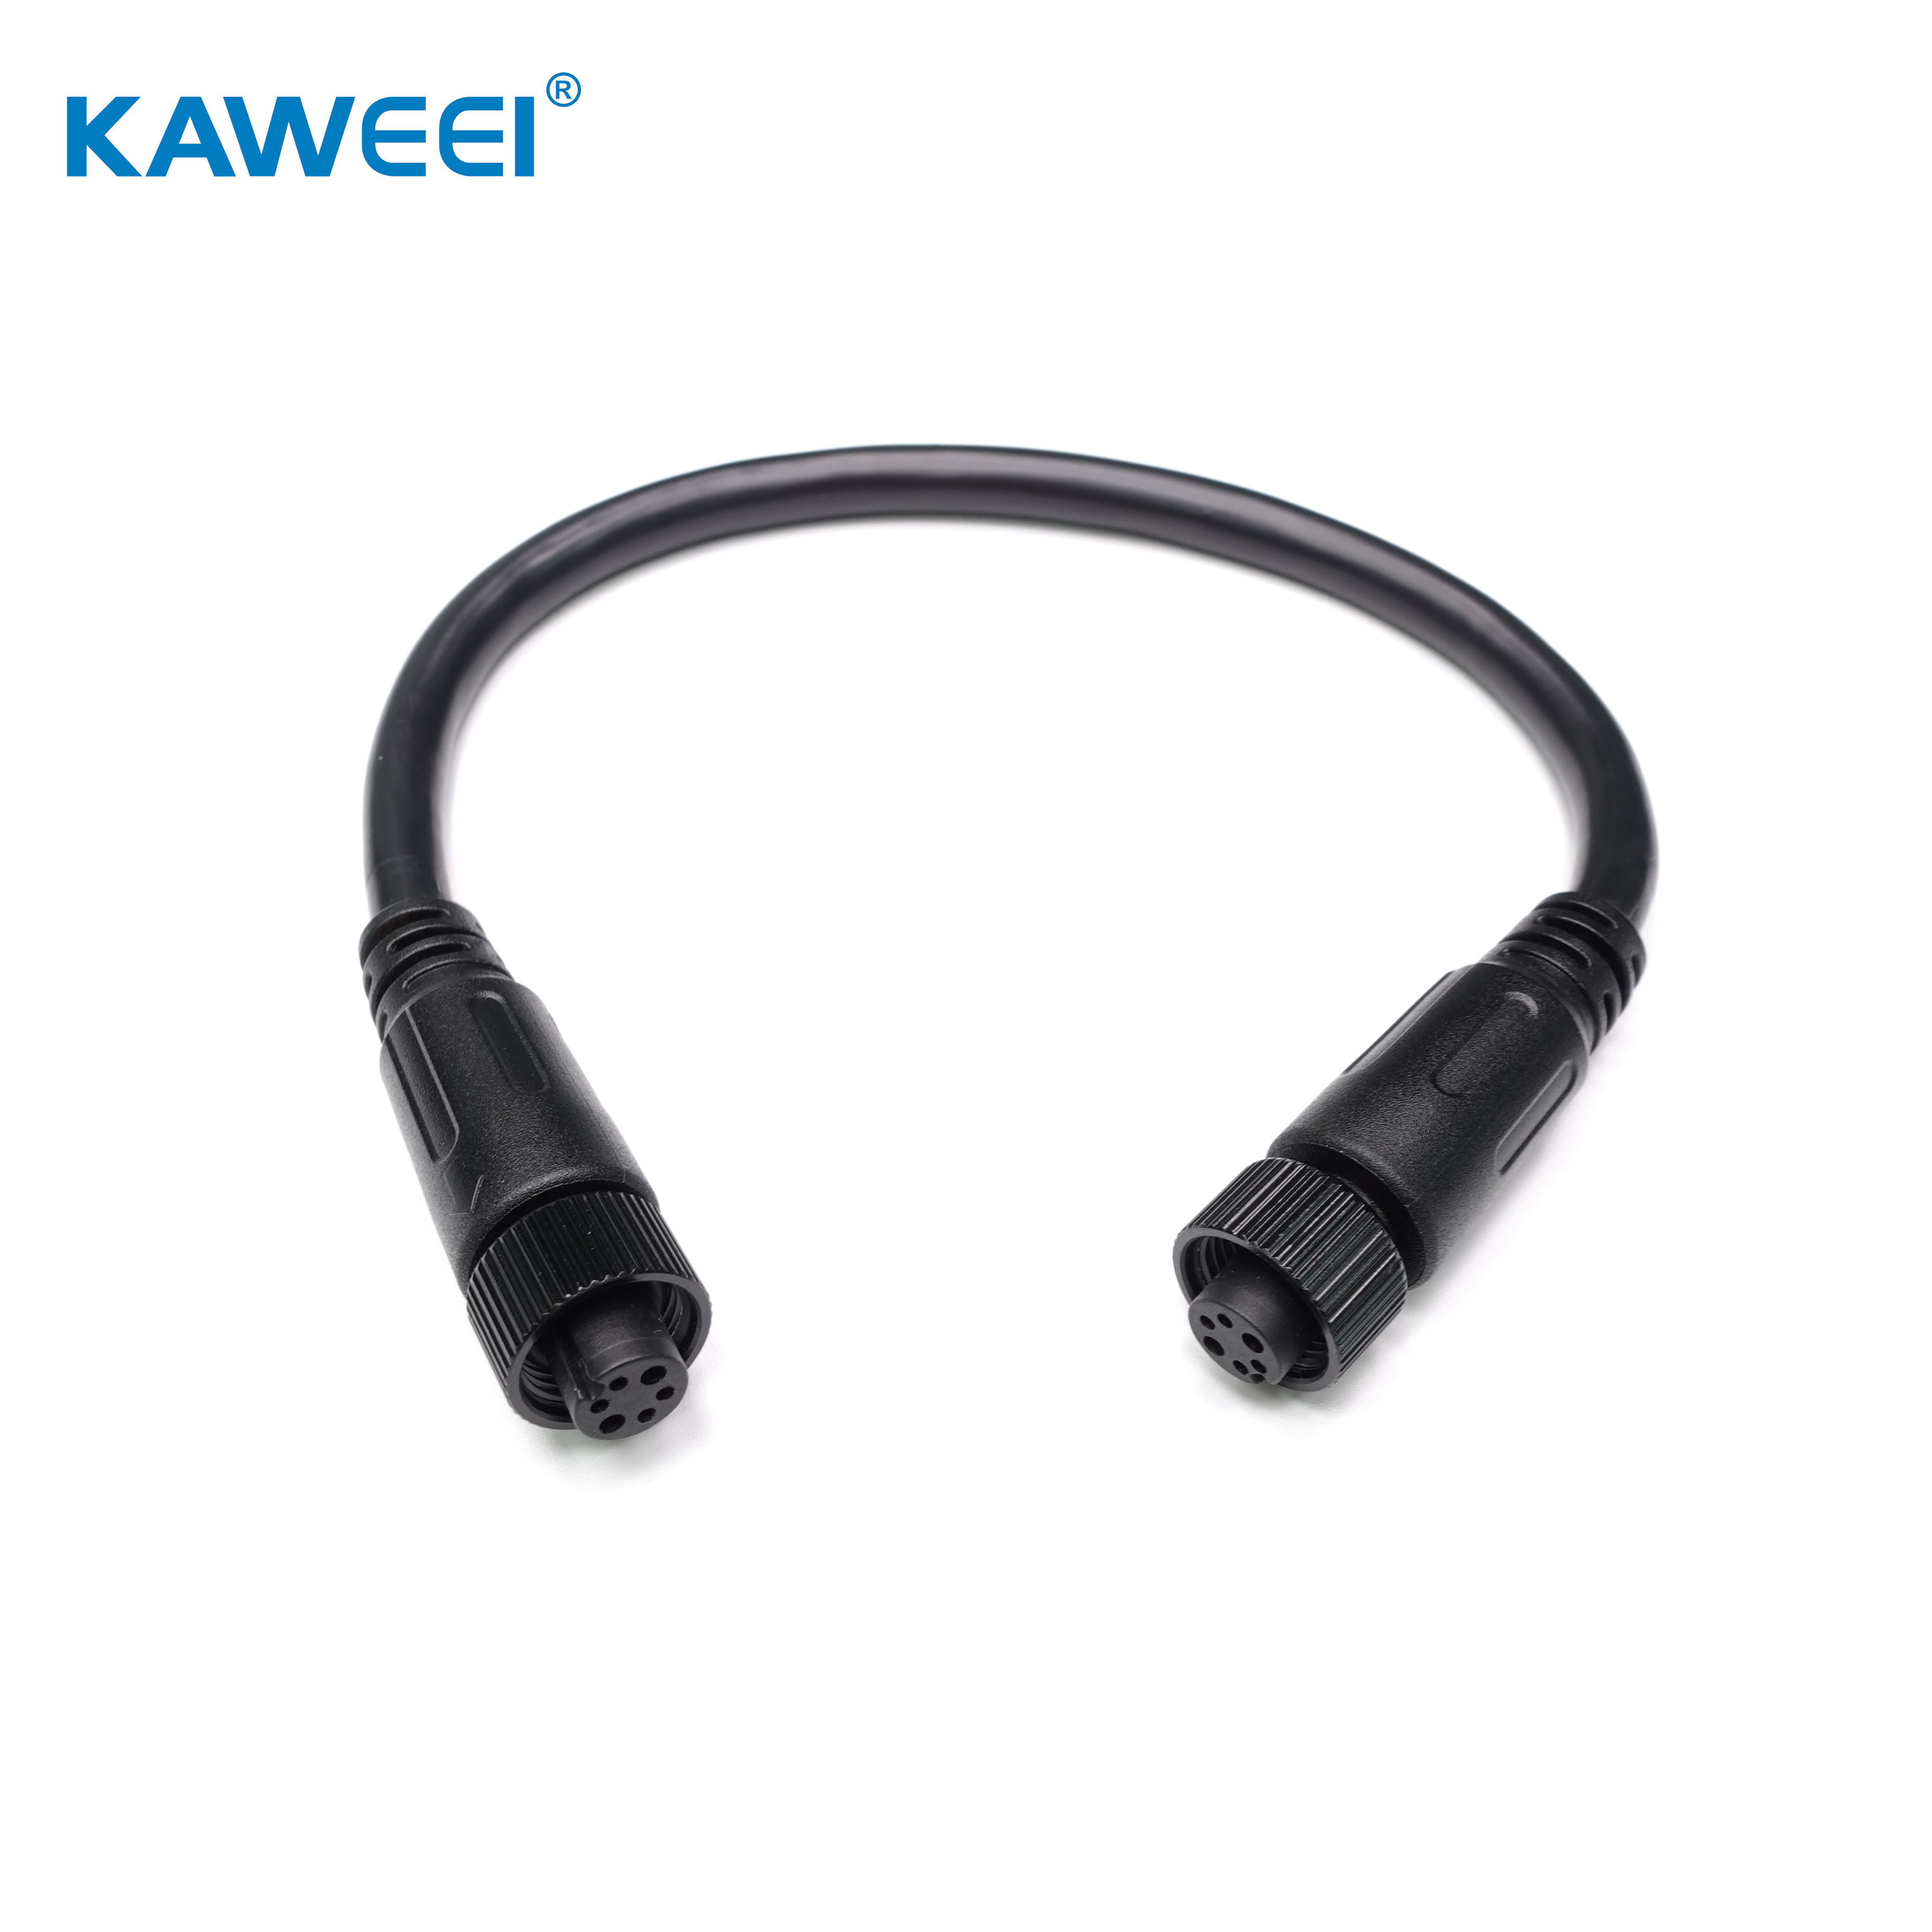 /m12-straight-sonsor-actuator-cable-assemblies-product/